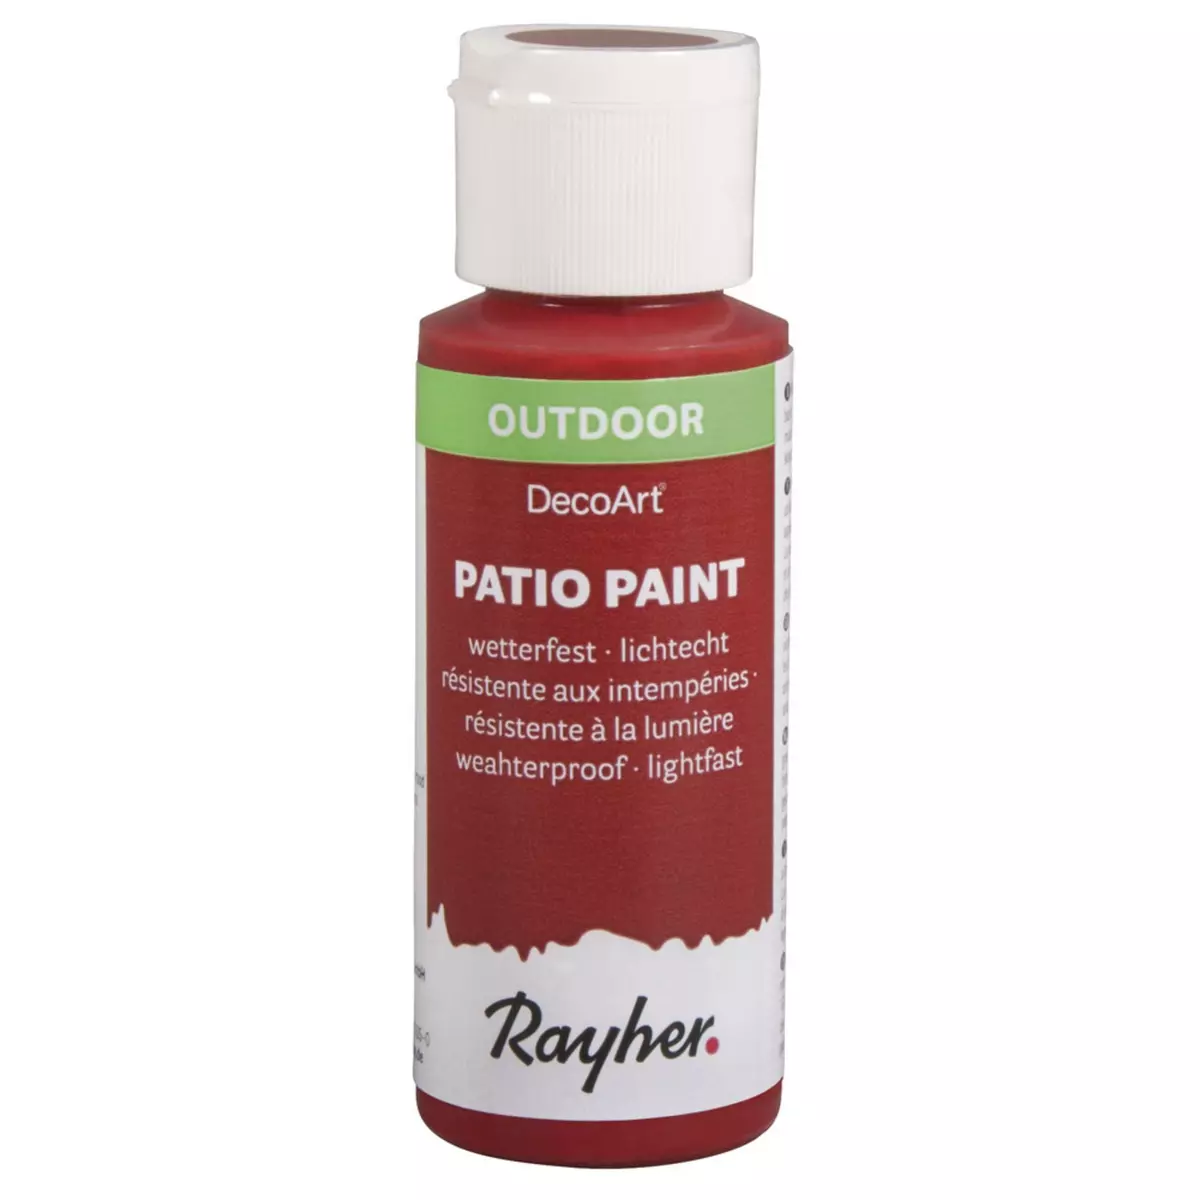 Rayher Patio Paint, rouge classique, flacon 59 ml